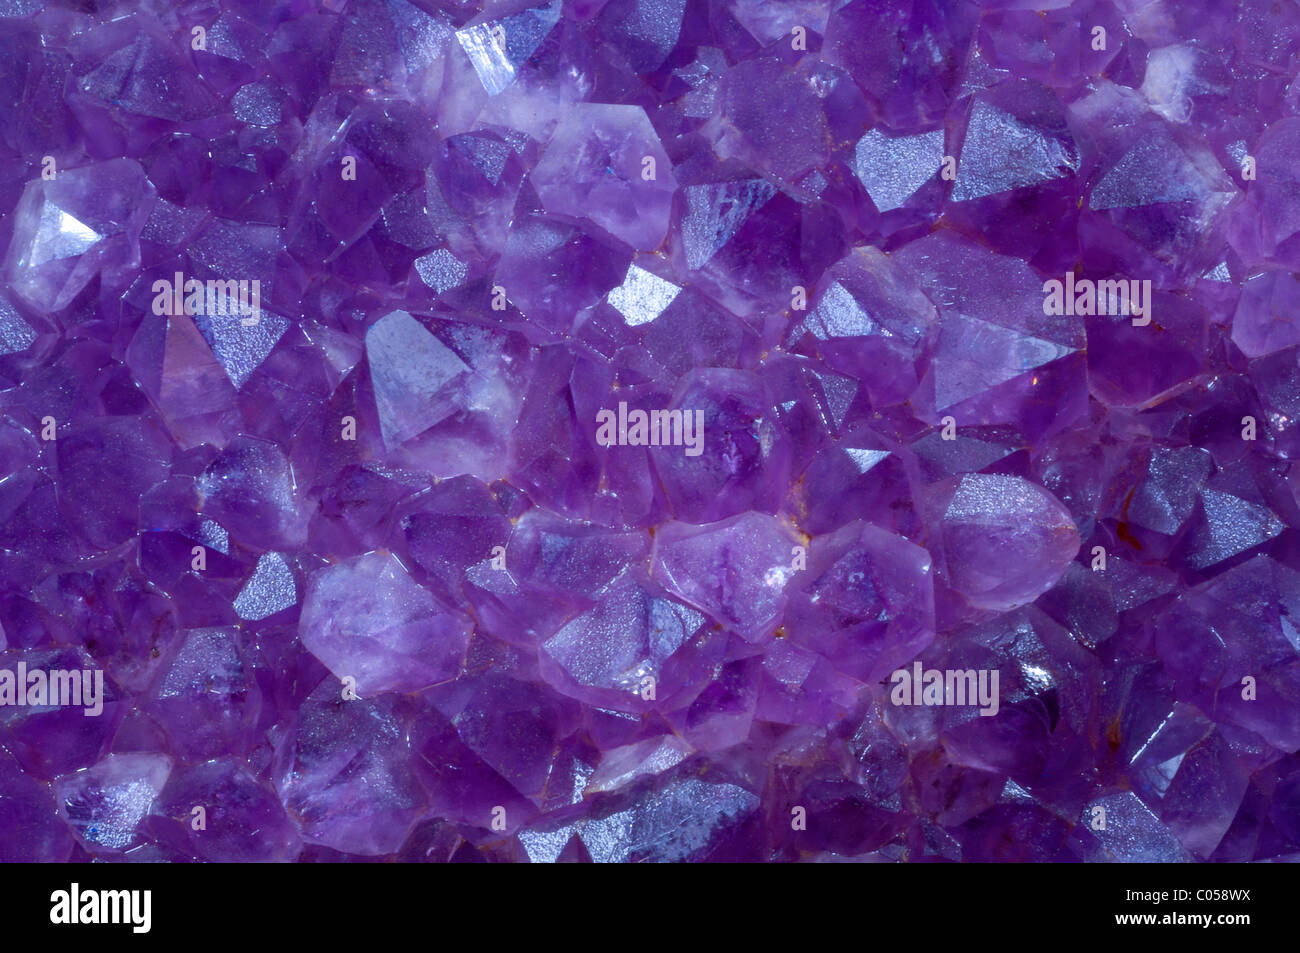 amethyst crystal stone detail of a textured surface Stock Photo